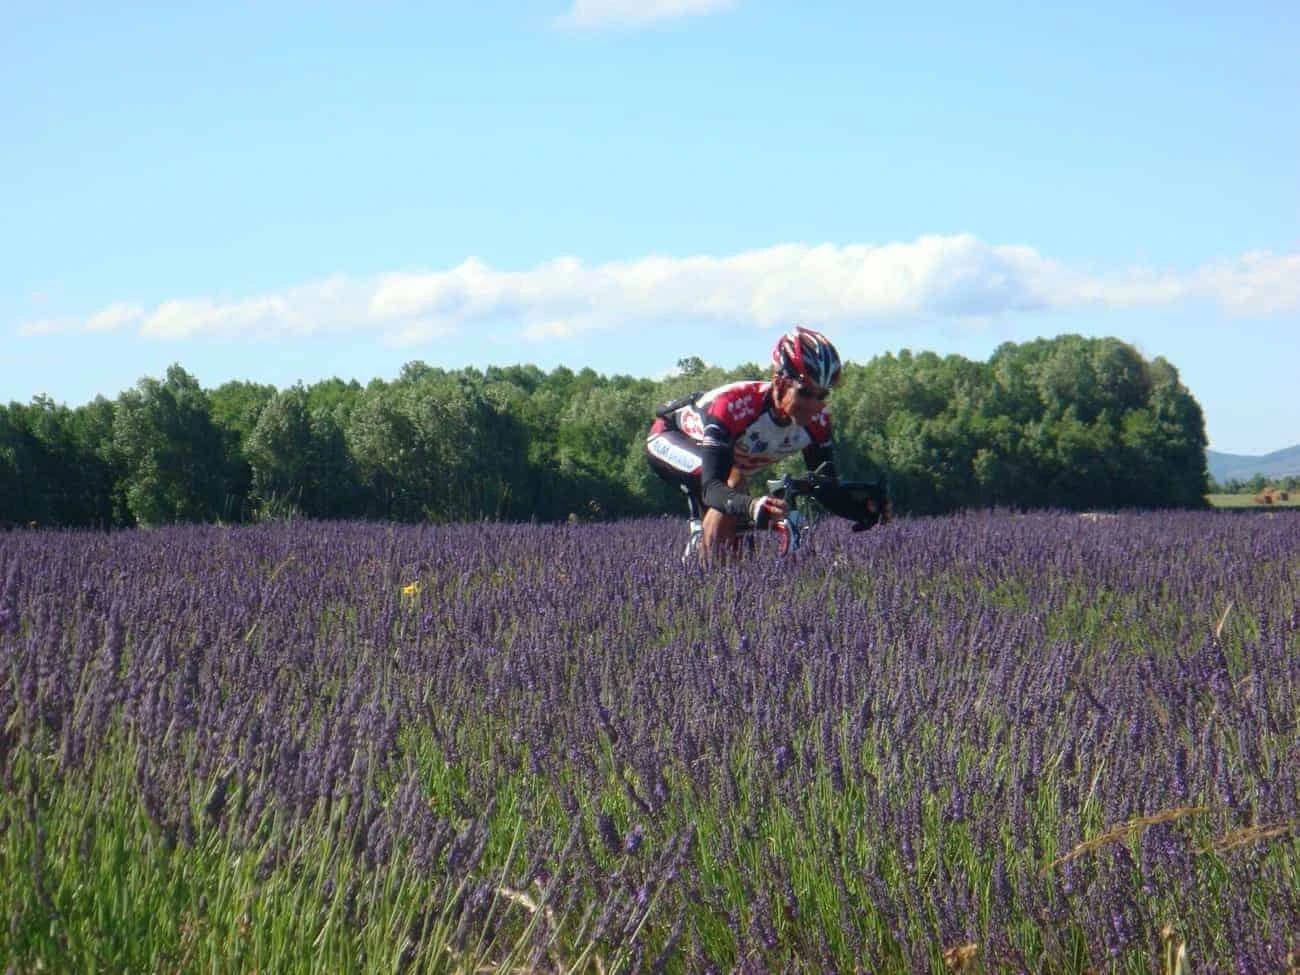 provence-on-a-bike-among-the-lavender-fields